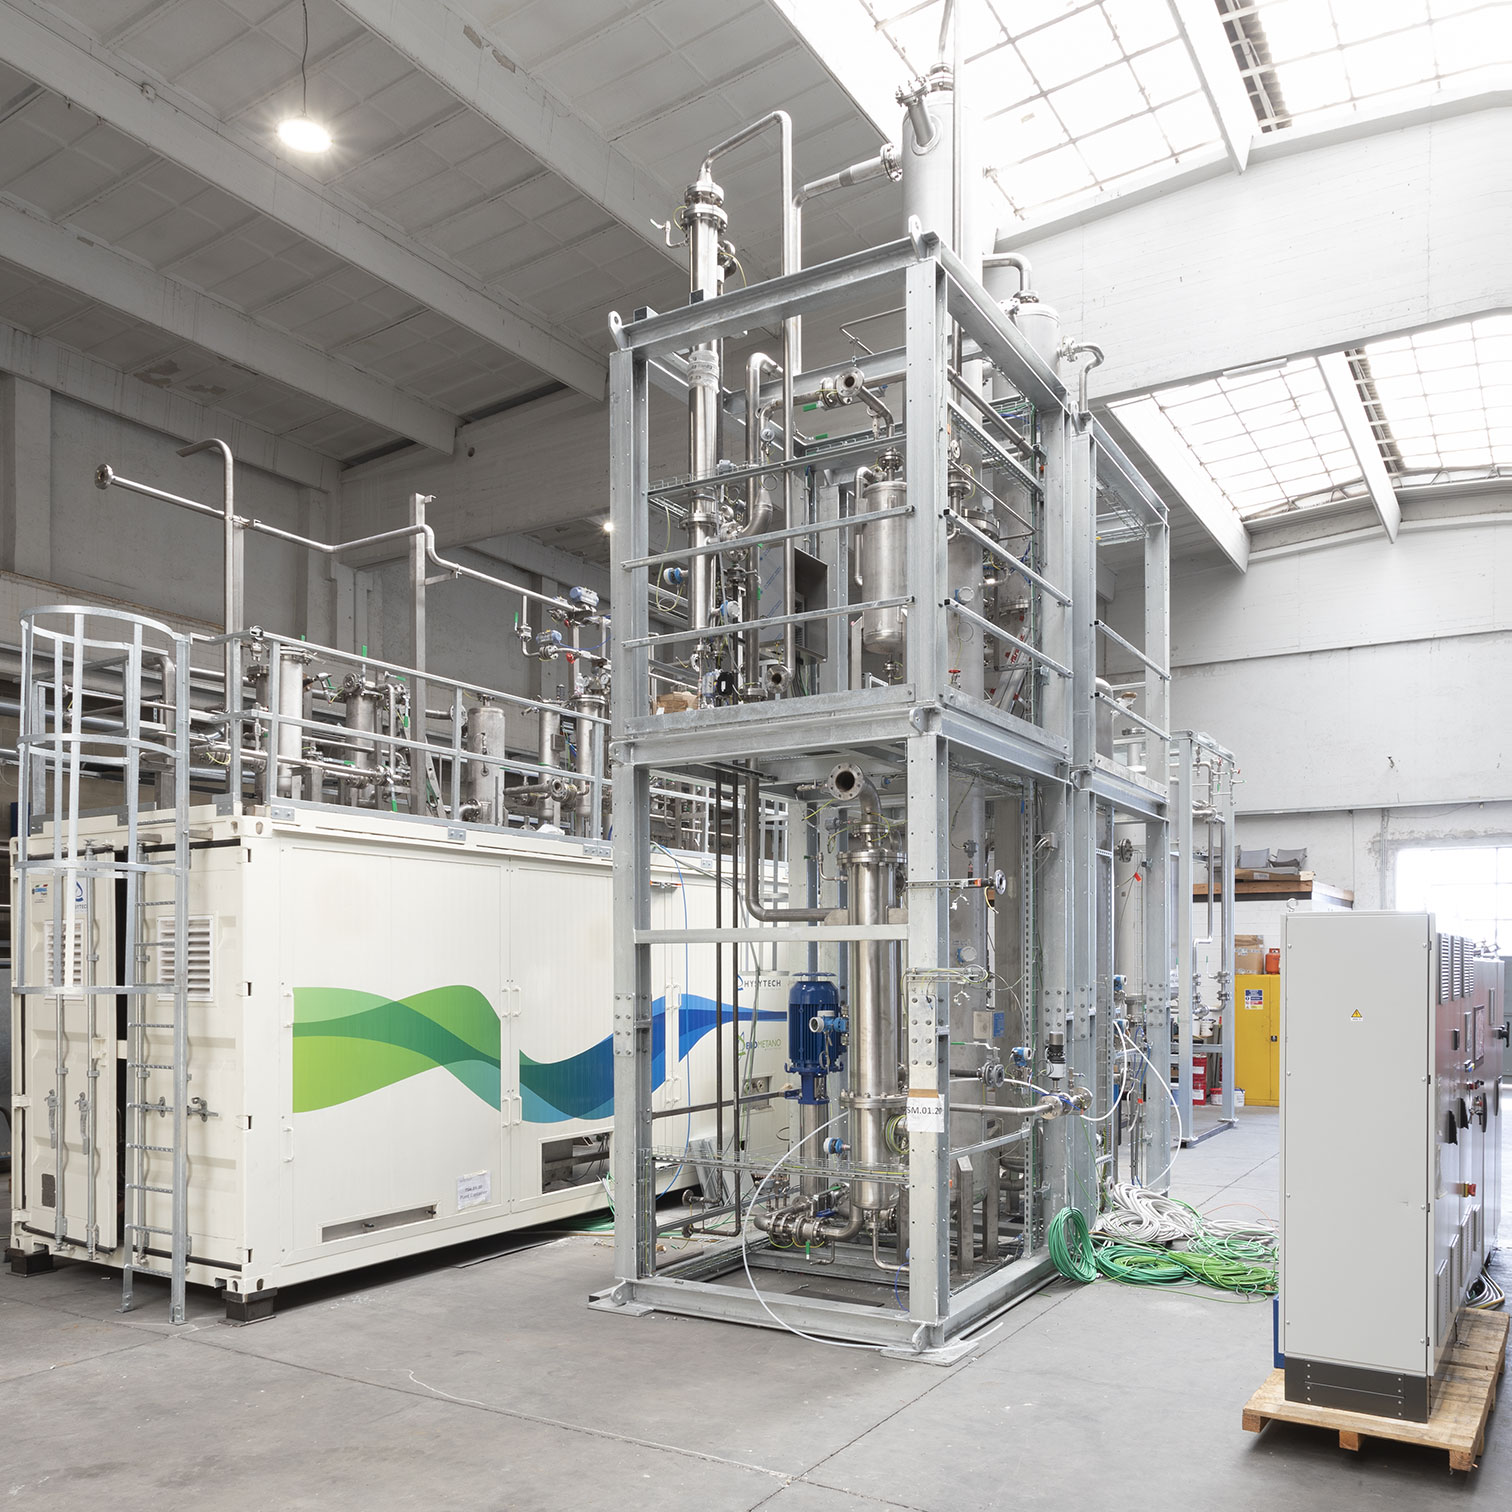 Hysytech's simple and complete plant to produce Biomethane